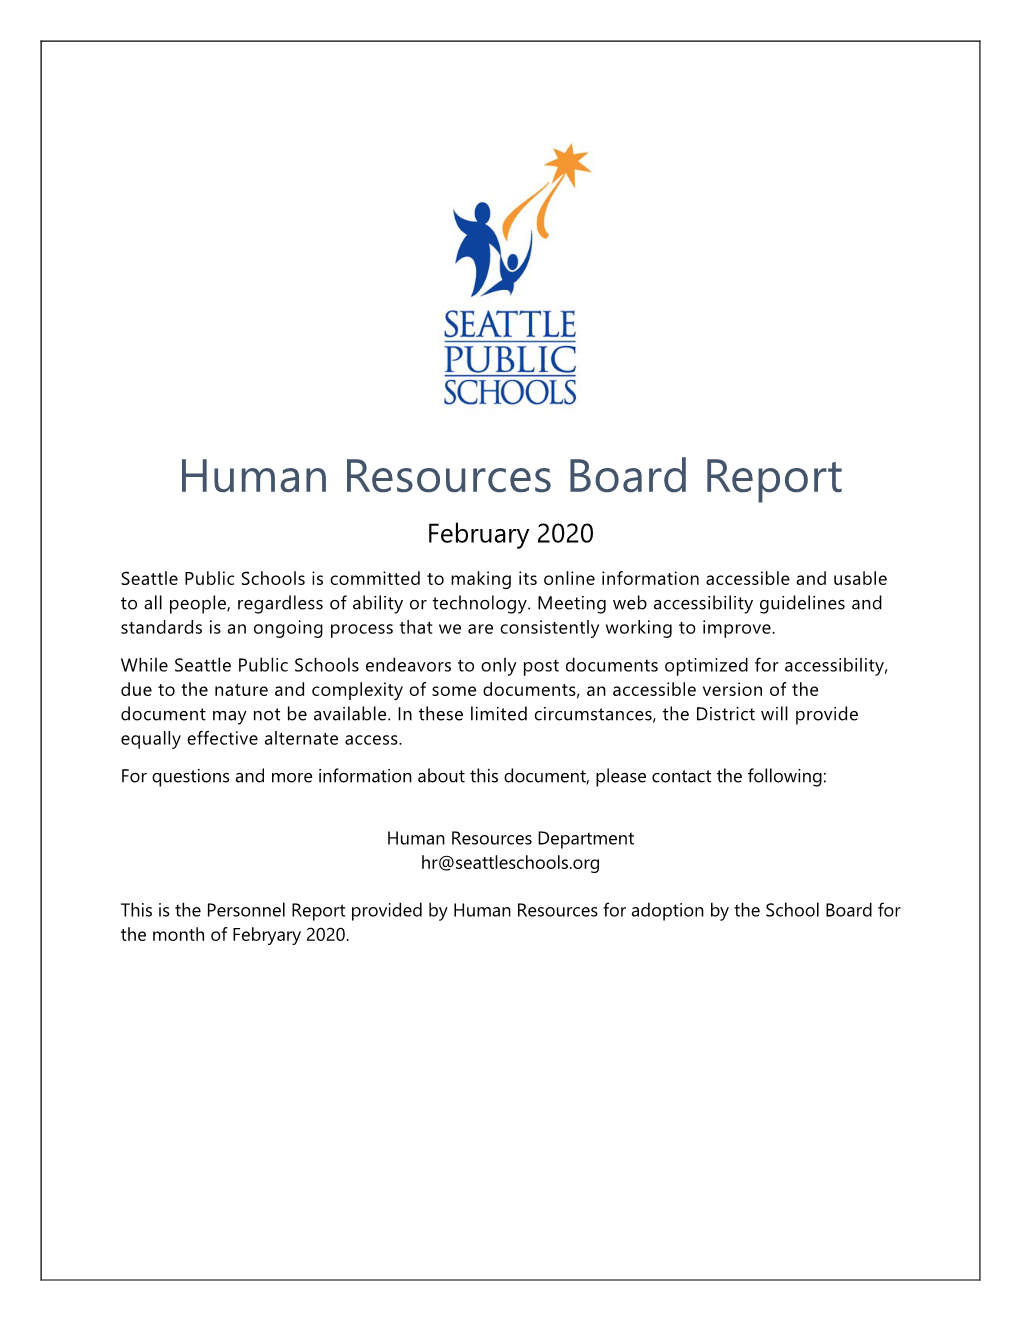 Human Resources Board Report February 2020